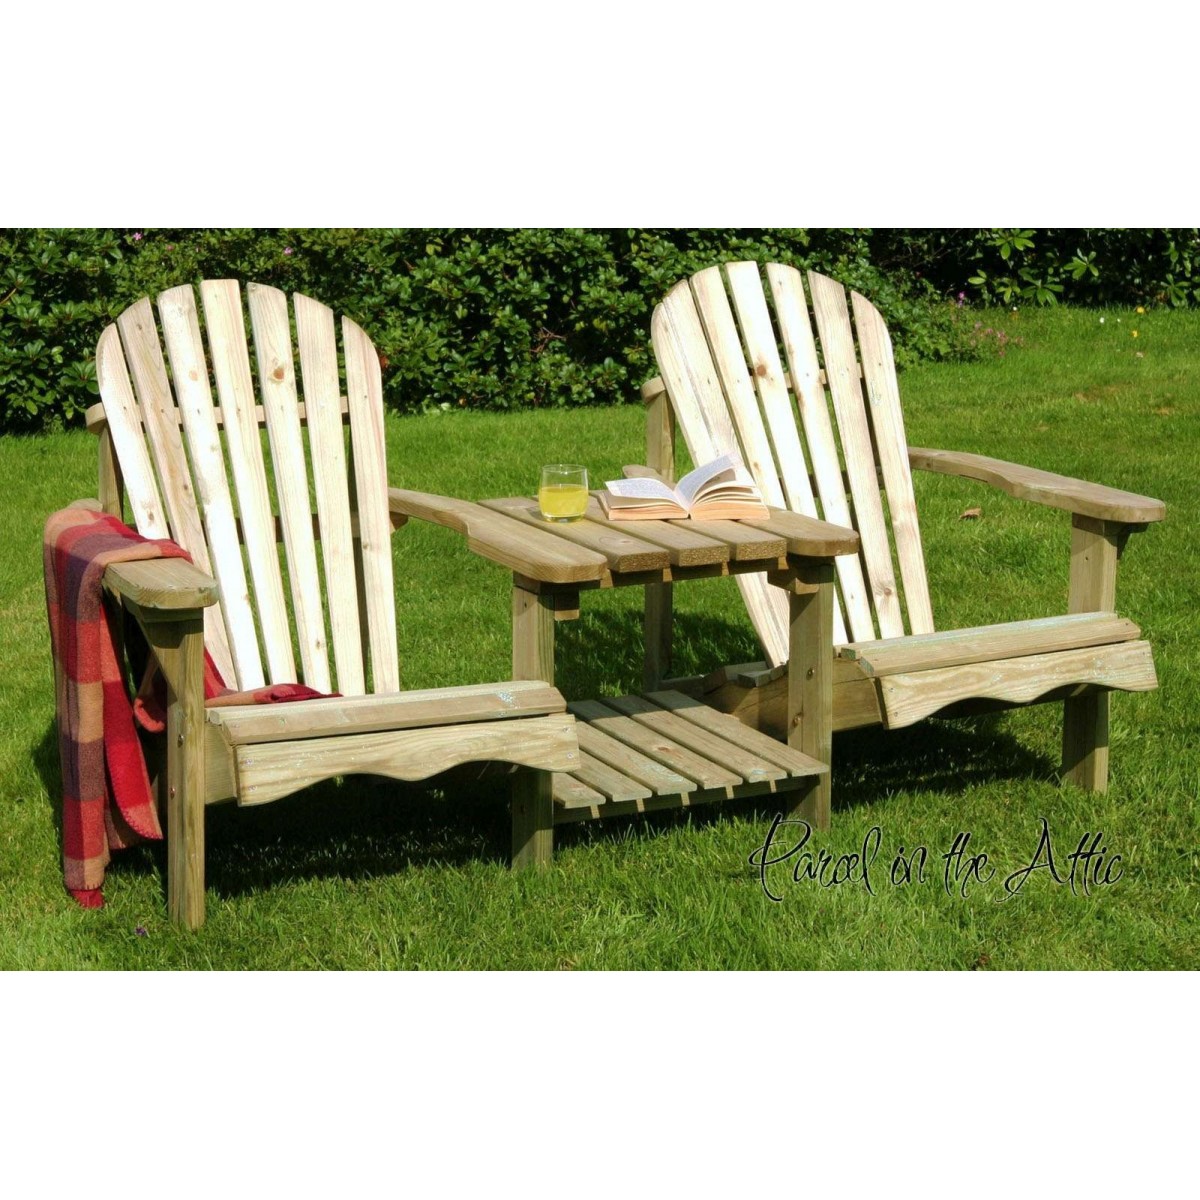 Solid wood Adirondack Double Chair